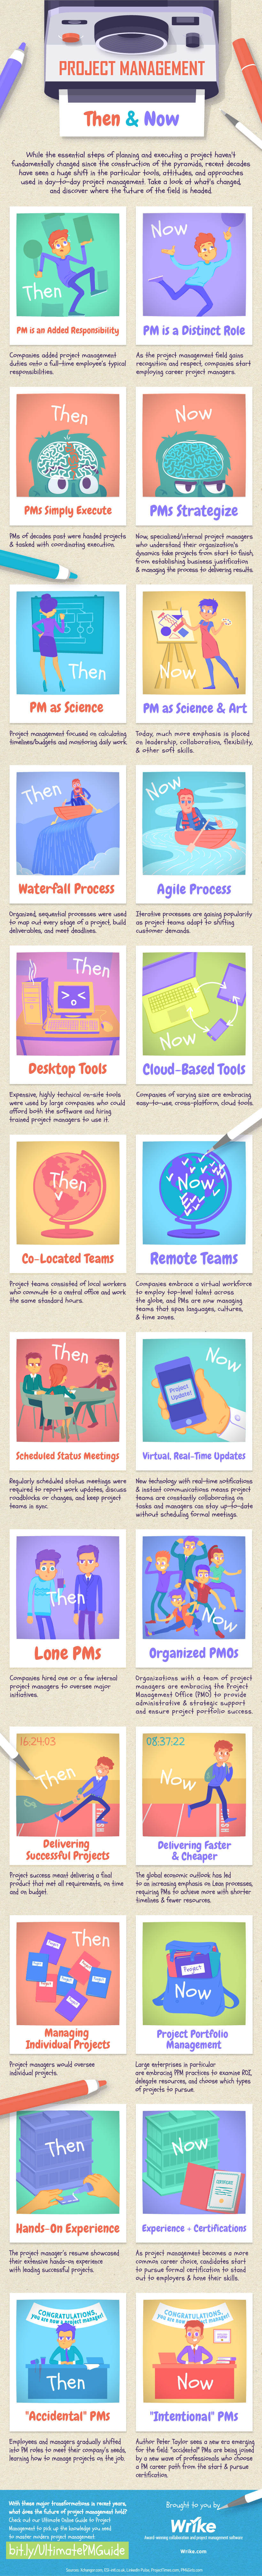 Project Management Then & Now (Infographic)